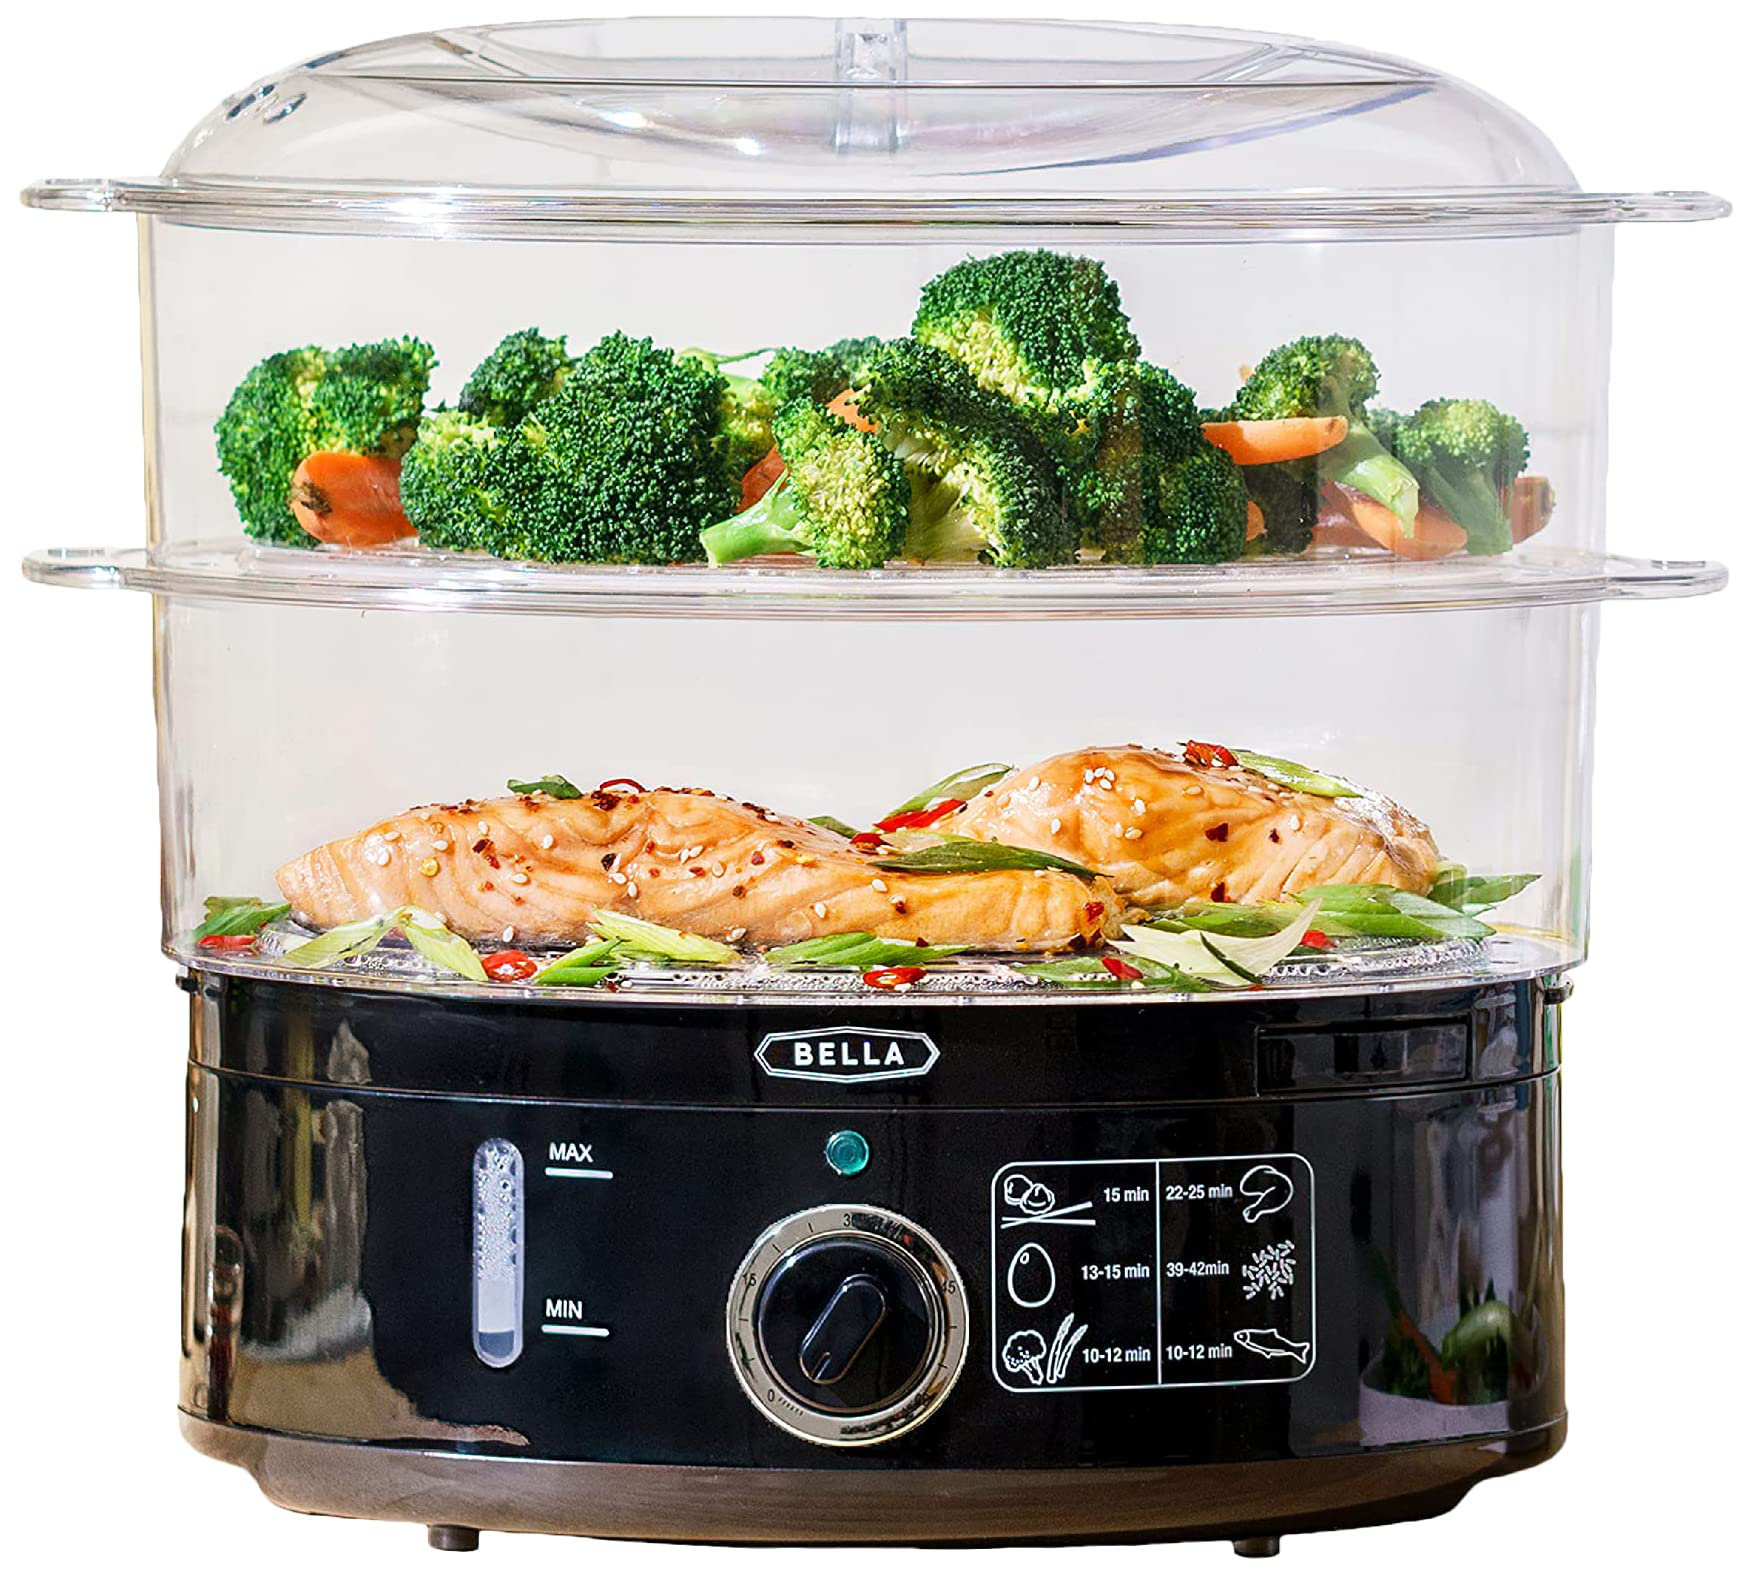 Brentwood Stainless Steel 1.9 Quart Cordless Electric Hot Pot Cooker and Food Steamer in Black